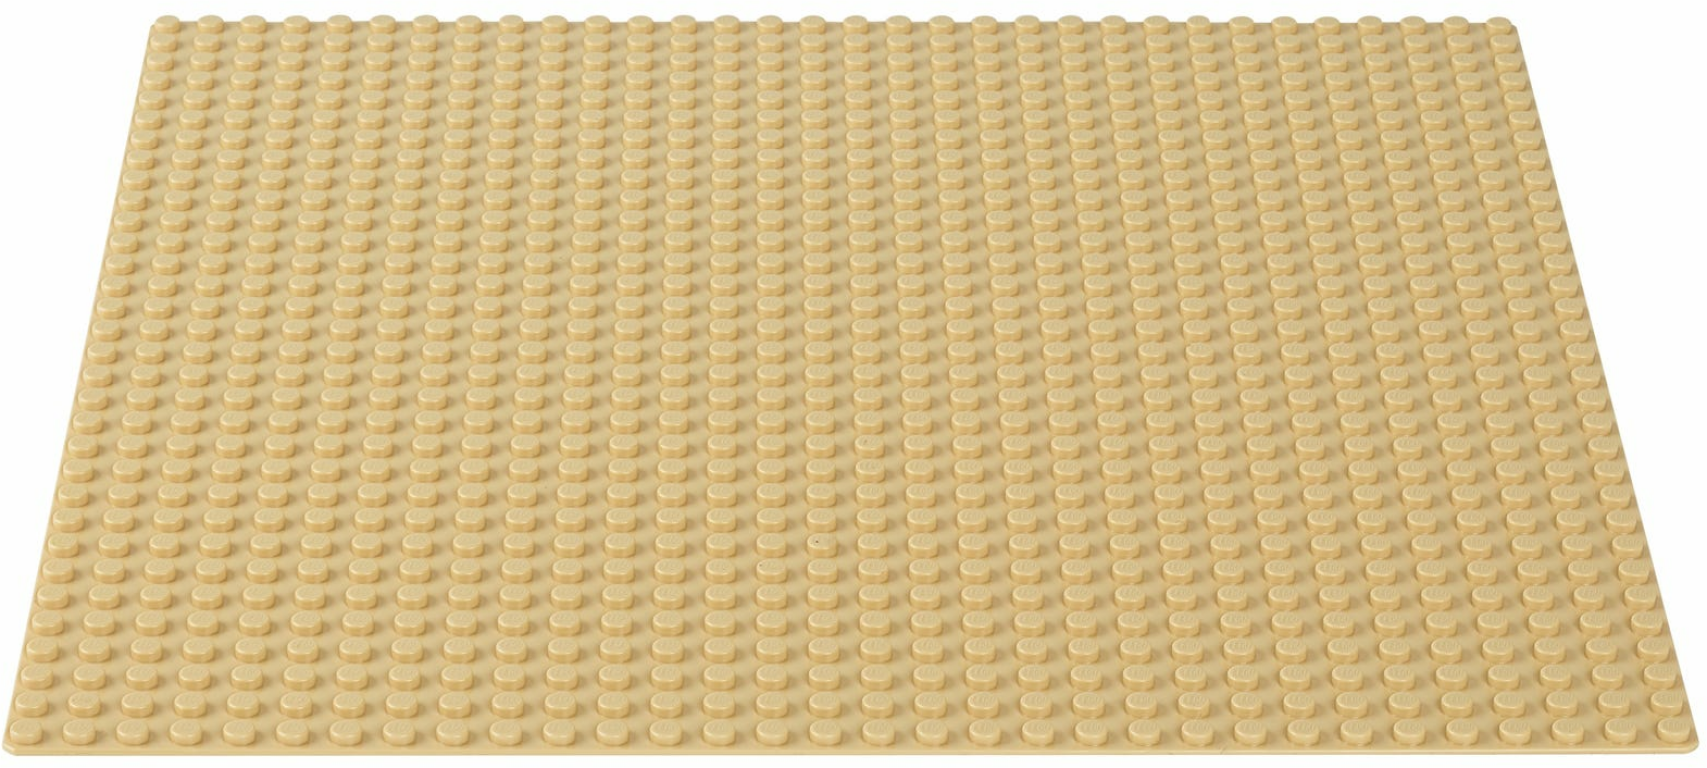 LEGO® Classic Sand Baseplate components